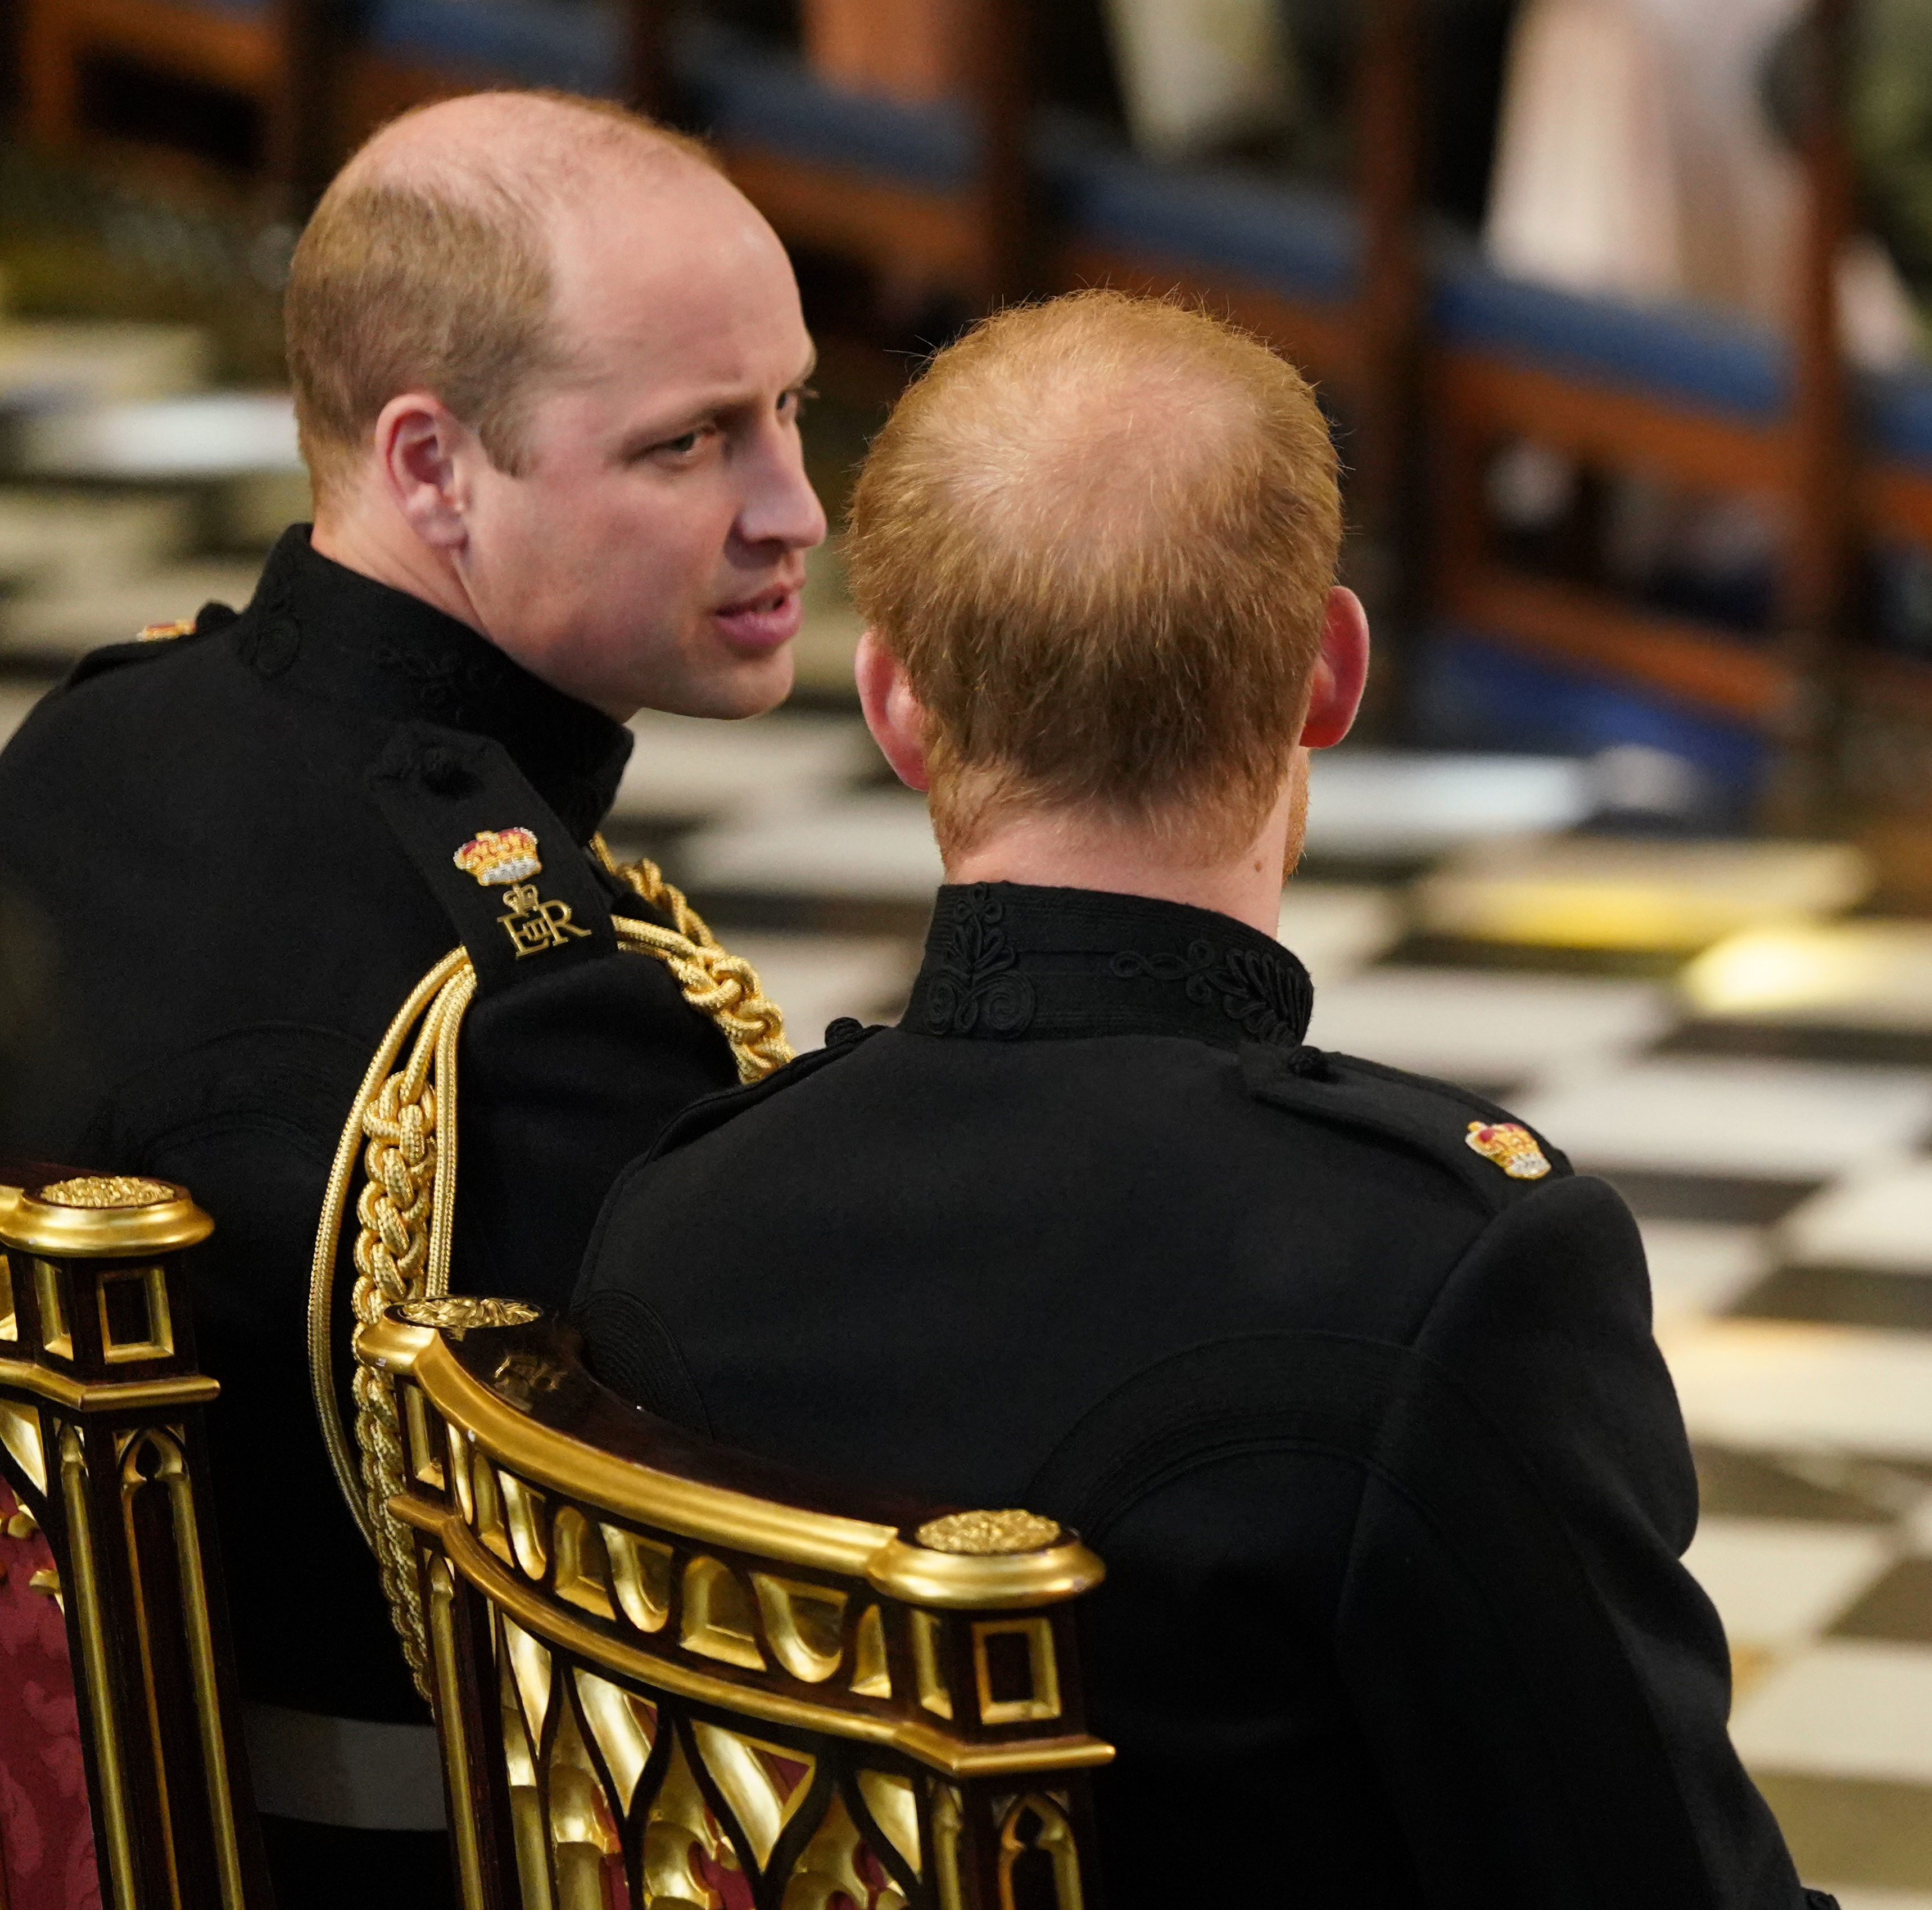 Prince William sitting next to and talking to Prince Harry ahead of the Duke of Sussex's wedding to Meghan Markle